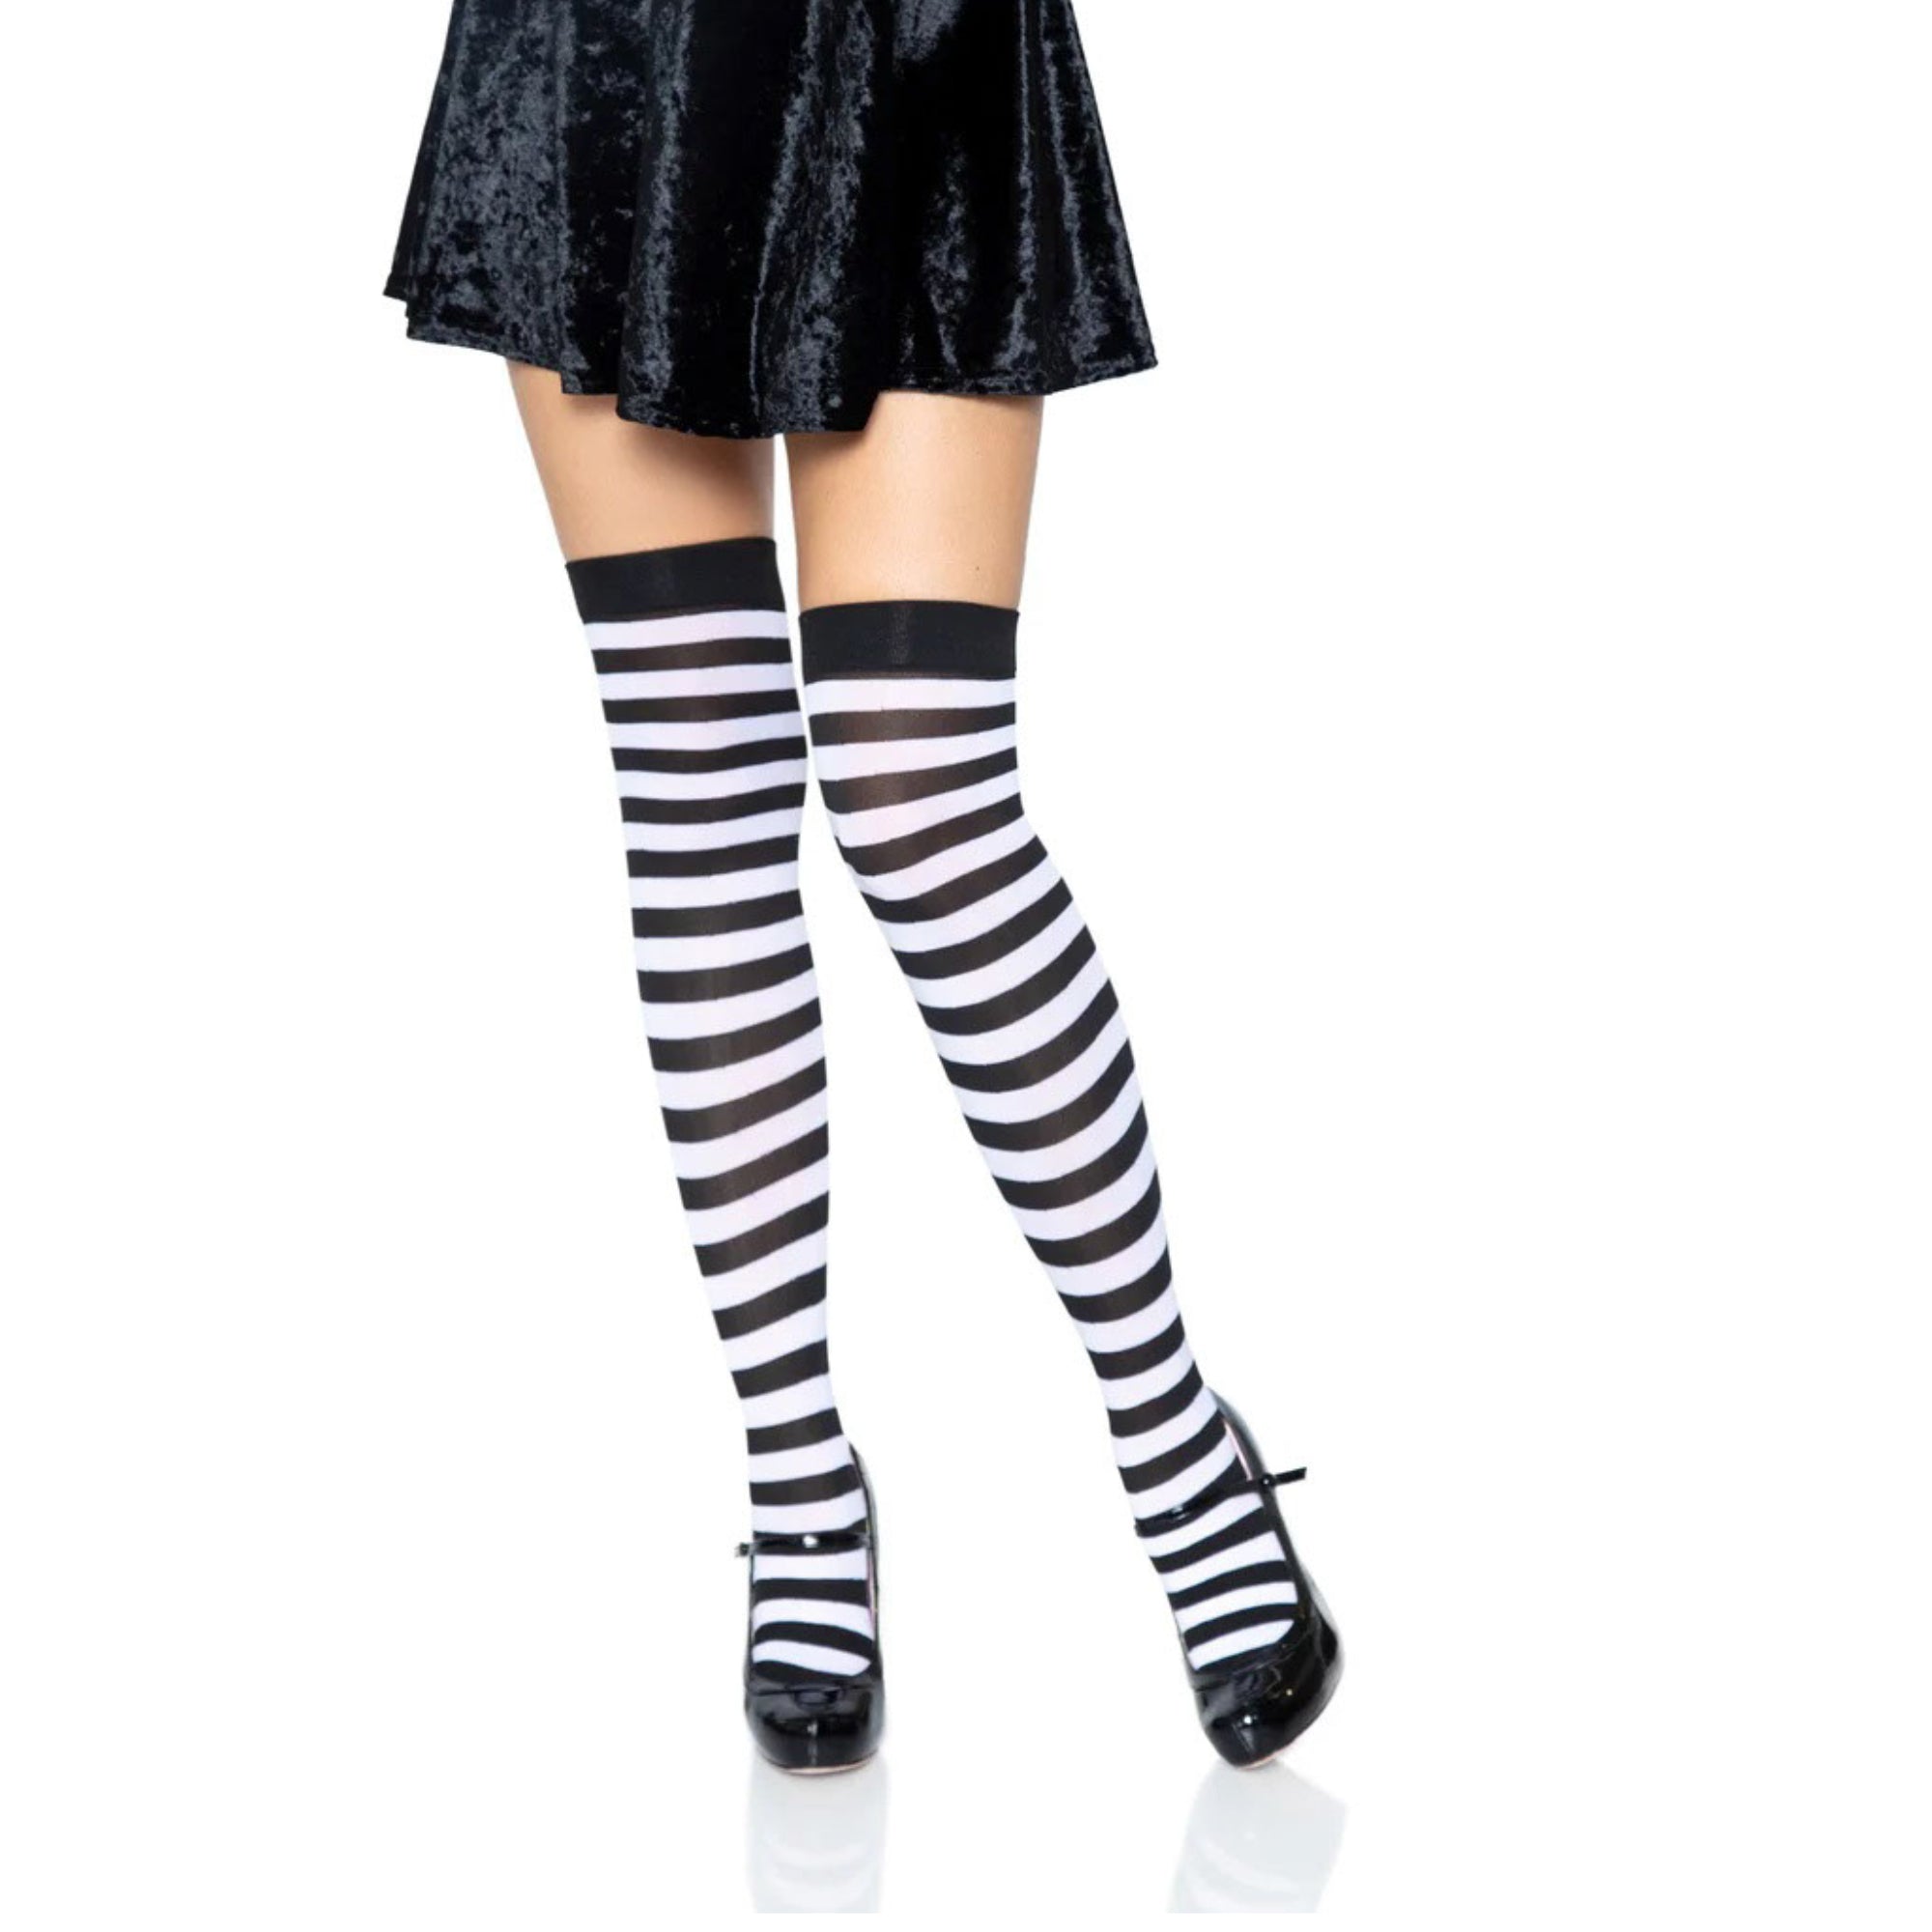 Thin Striped Patterned Socks (Thigh High) from the Sock Panda White